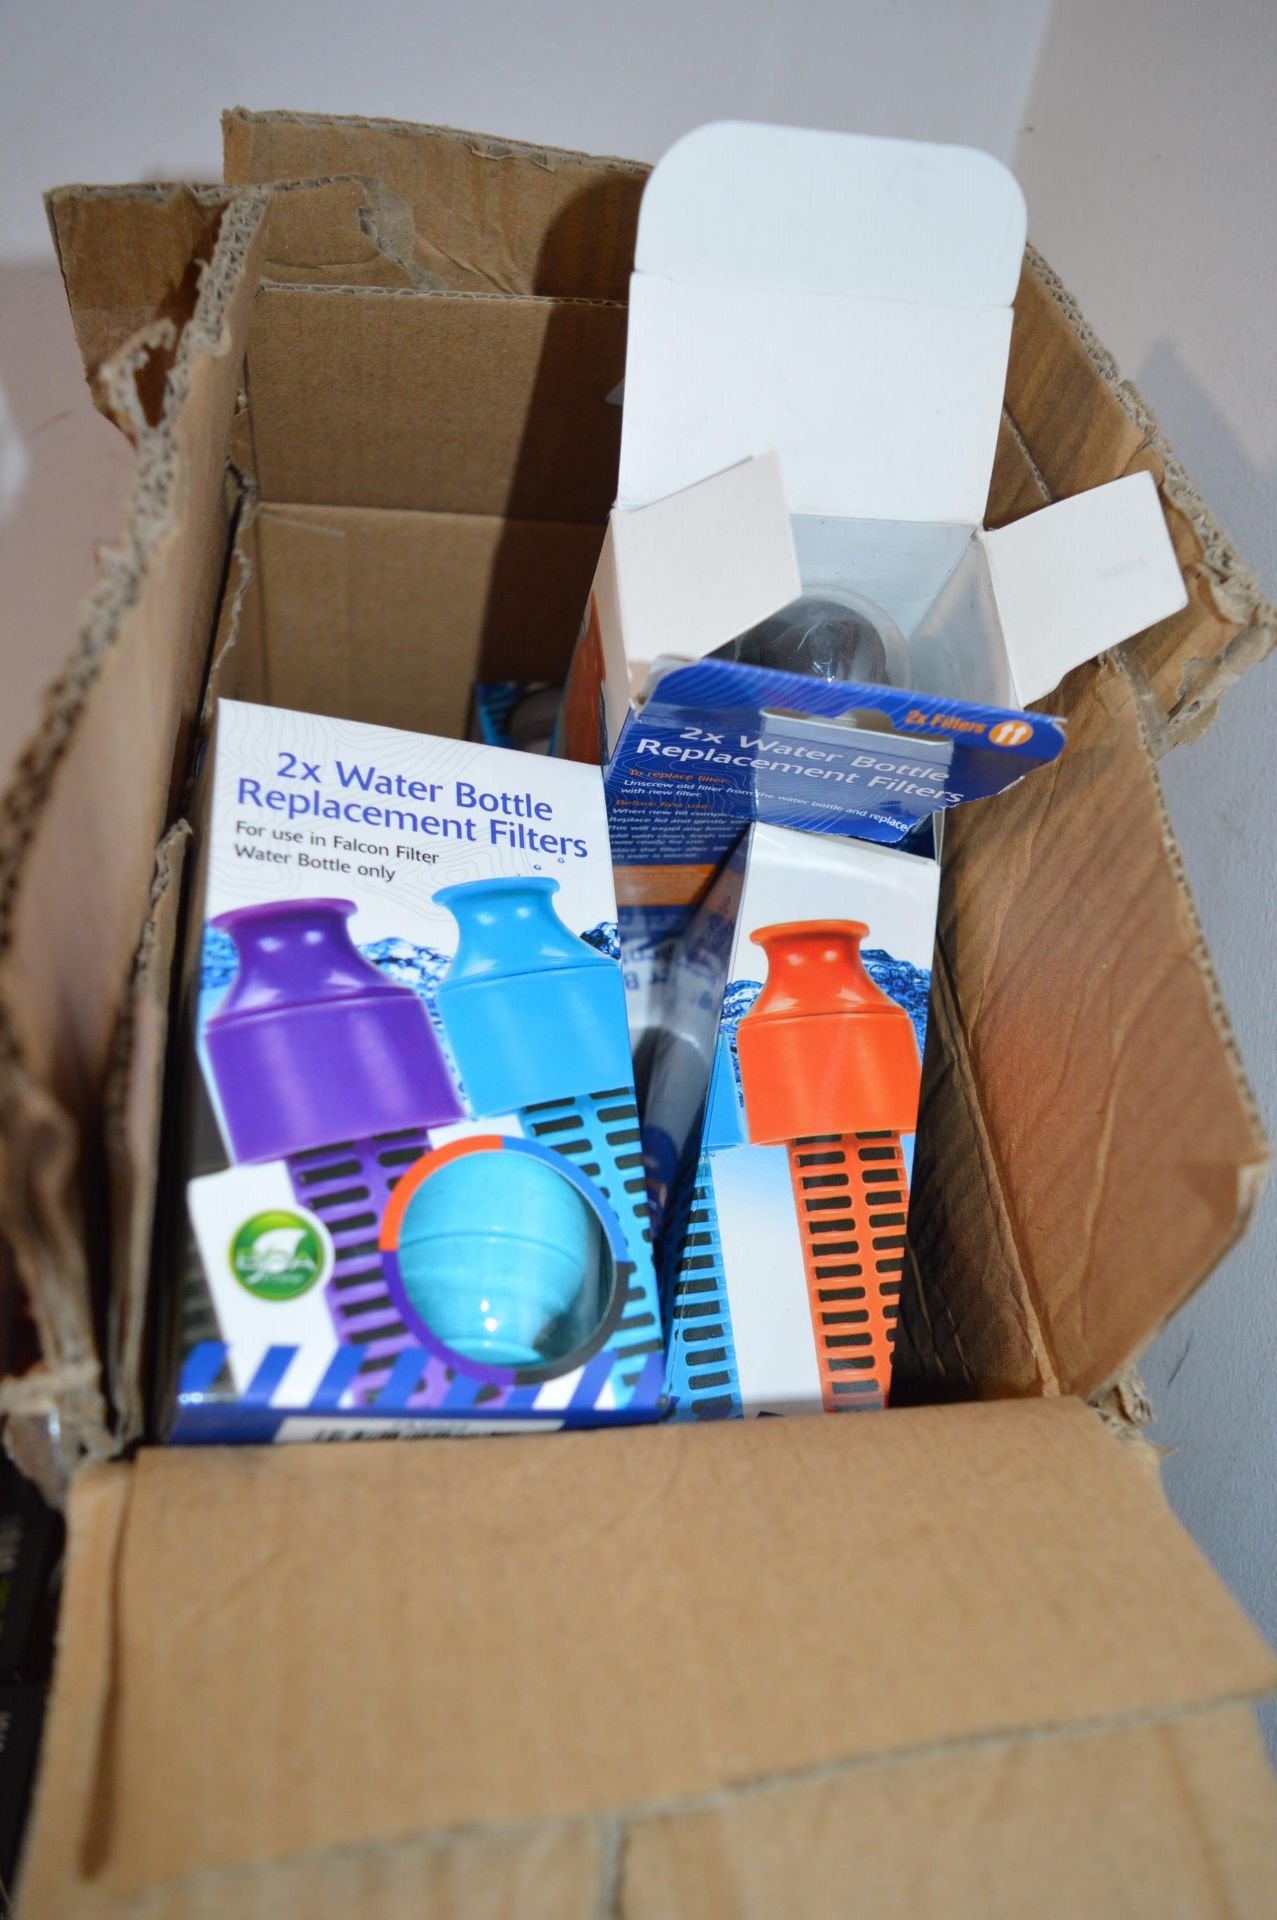 Box of Water Bottle Replacement Filters - Image 2 of 3